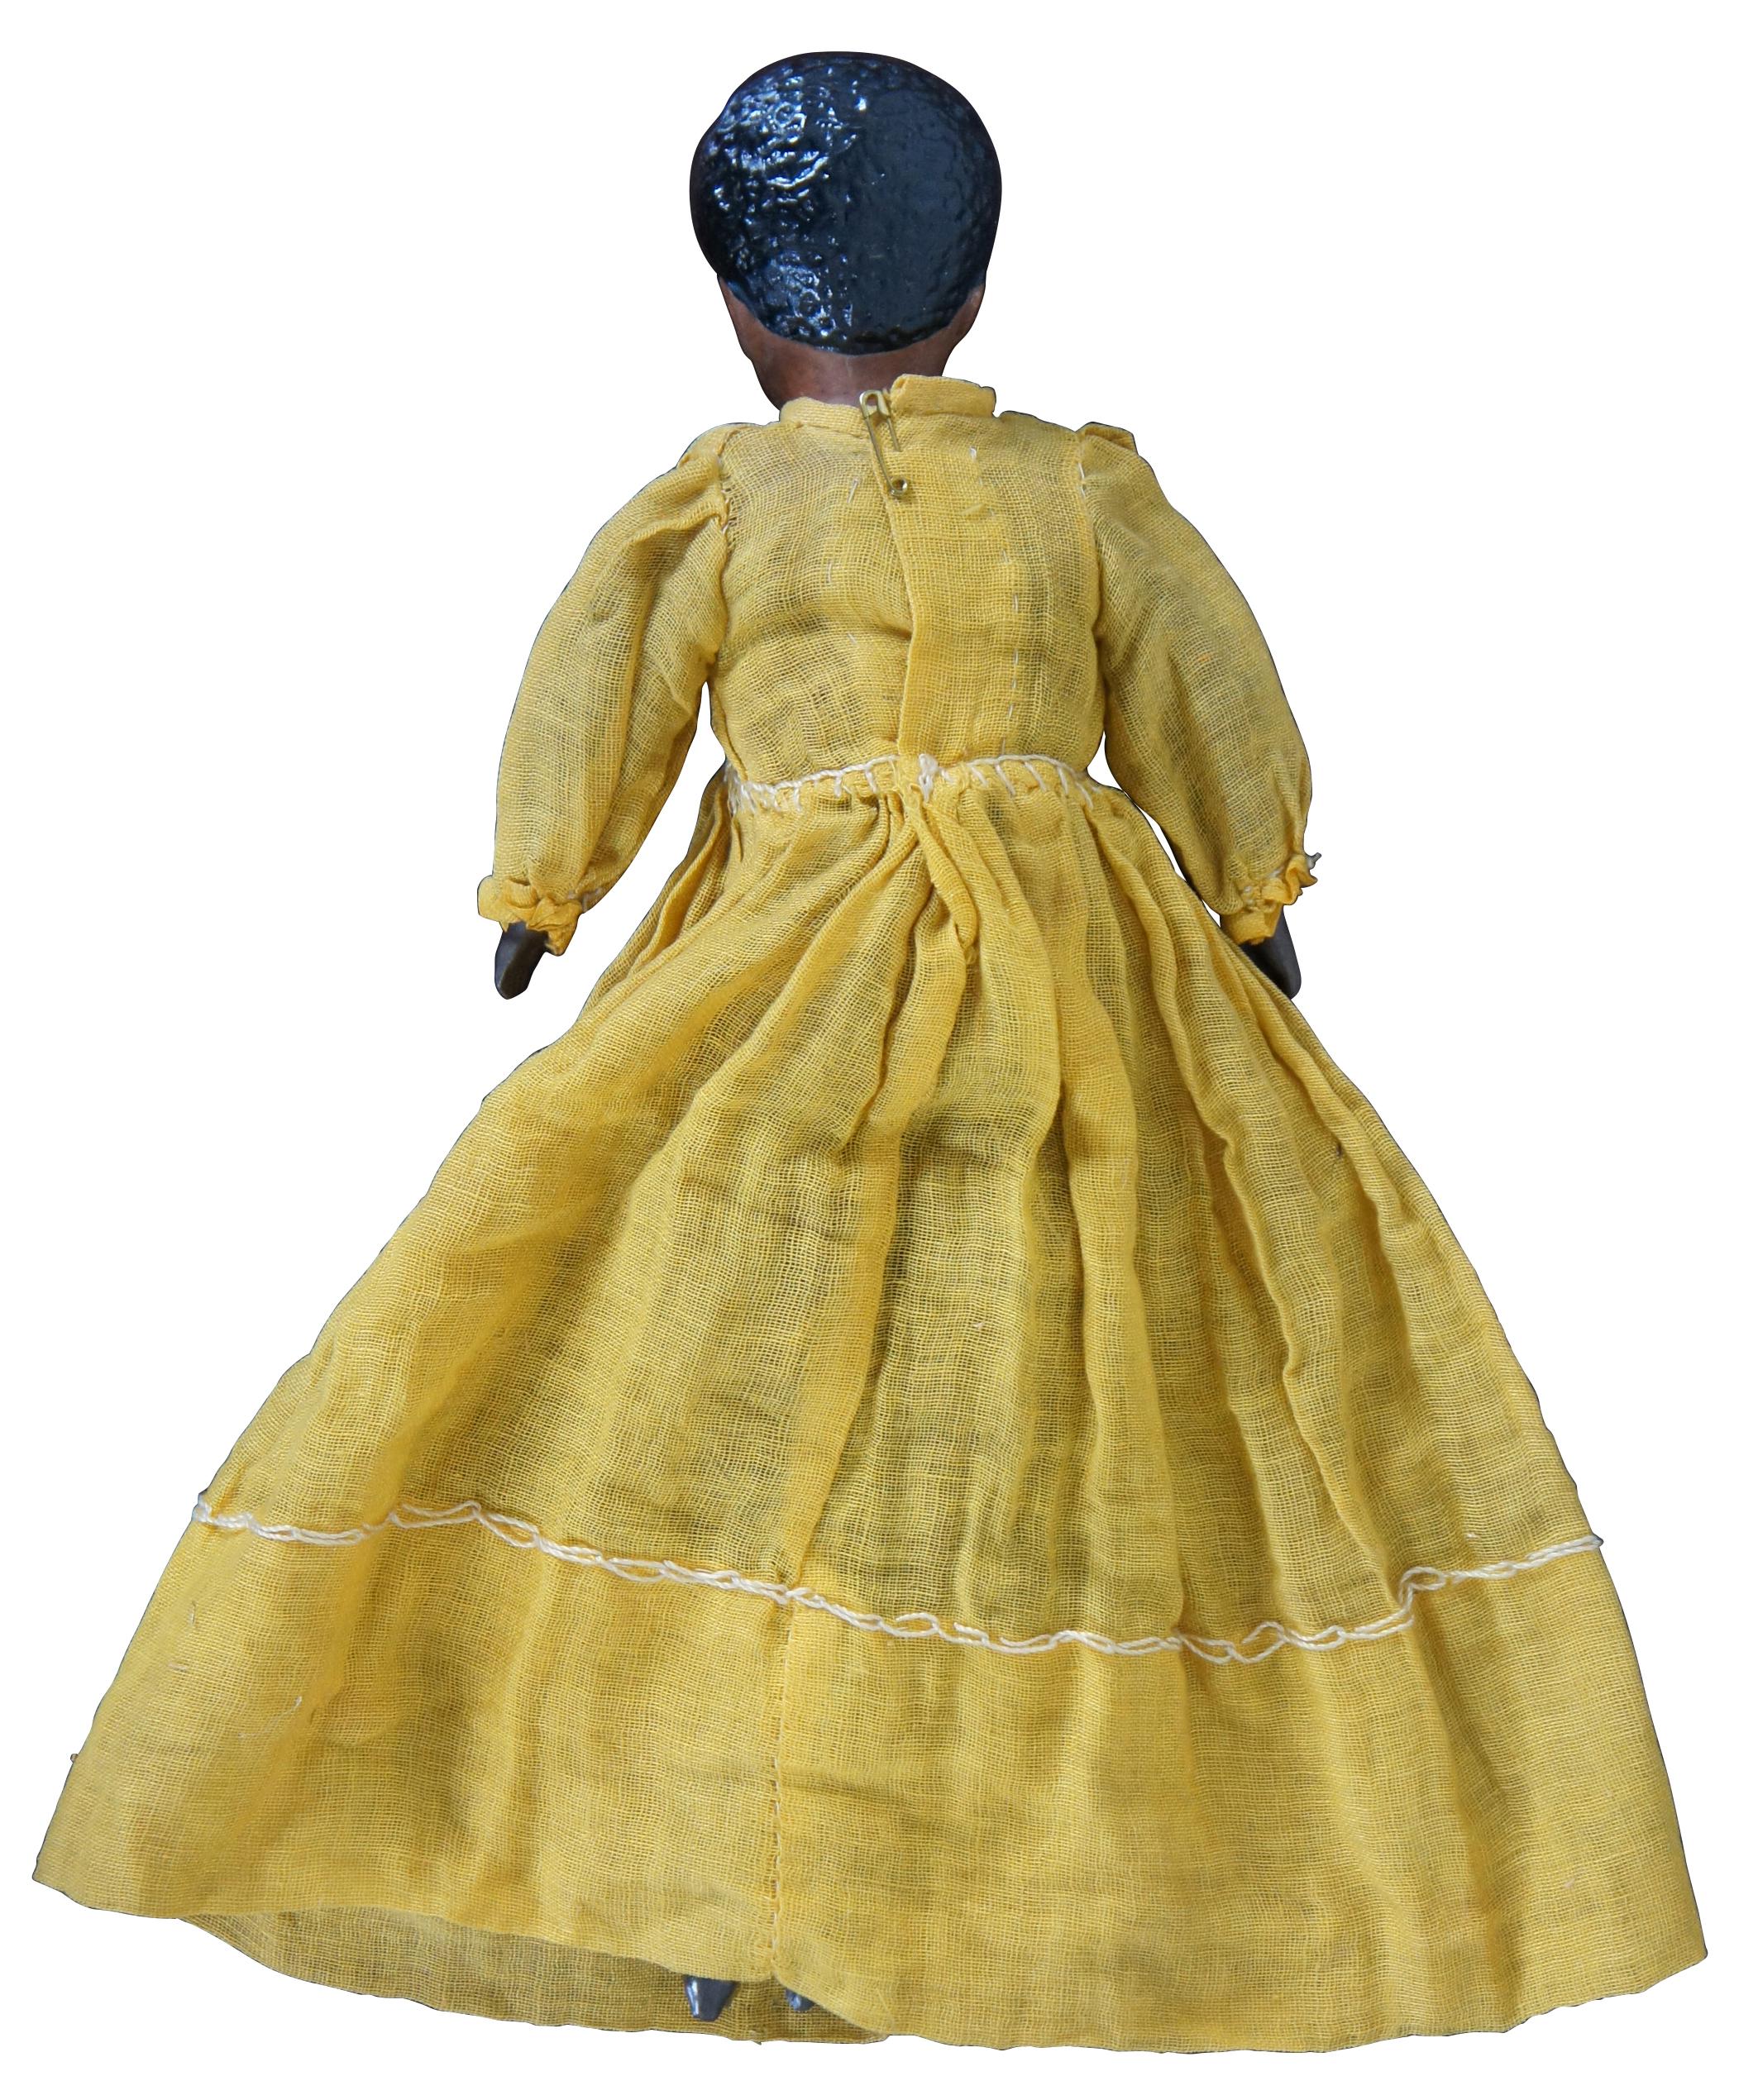 Unique antique 19th century African American (possibly mulatto?) doll with bisque head and hands, molded boots and cropped hair style, and a cloth body dressed in a yellow dress.